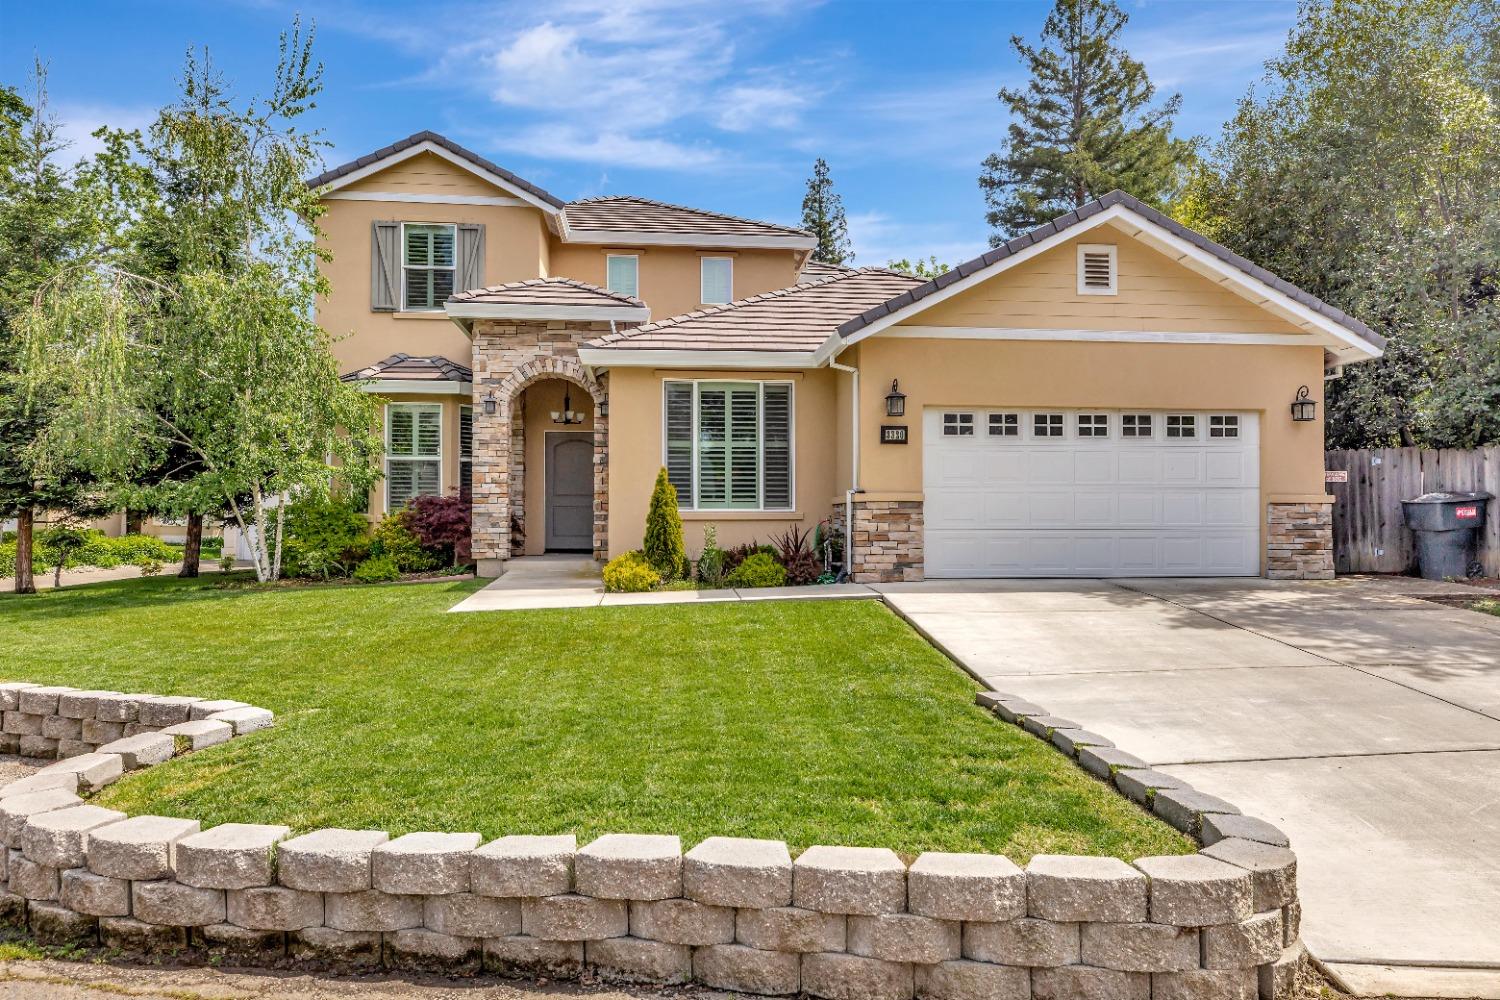 Photo of 3320 Winsome Ln in Carmichael, CA